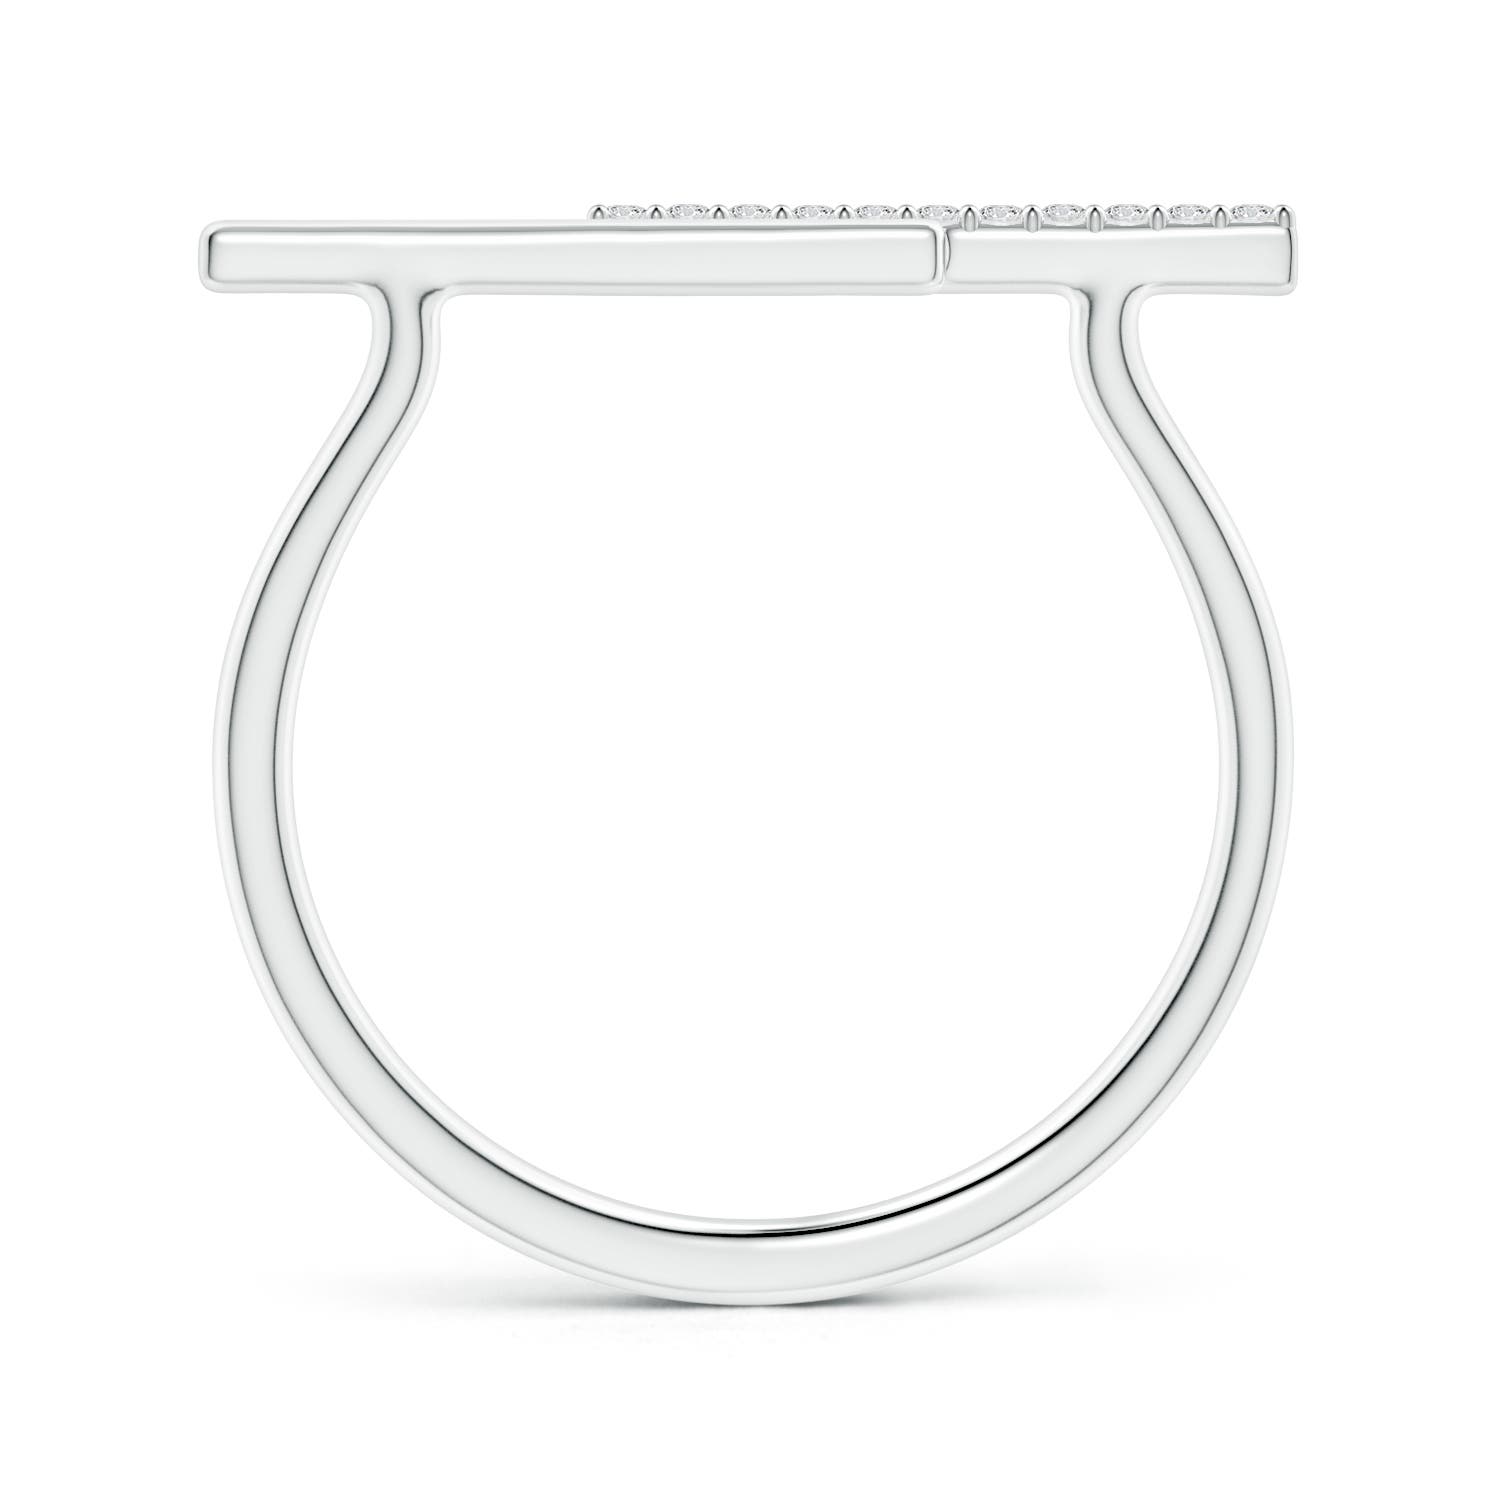 H, SI2 / 0.06 CT / 14 KT White Gold